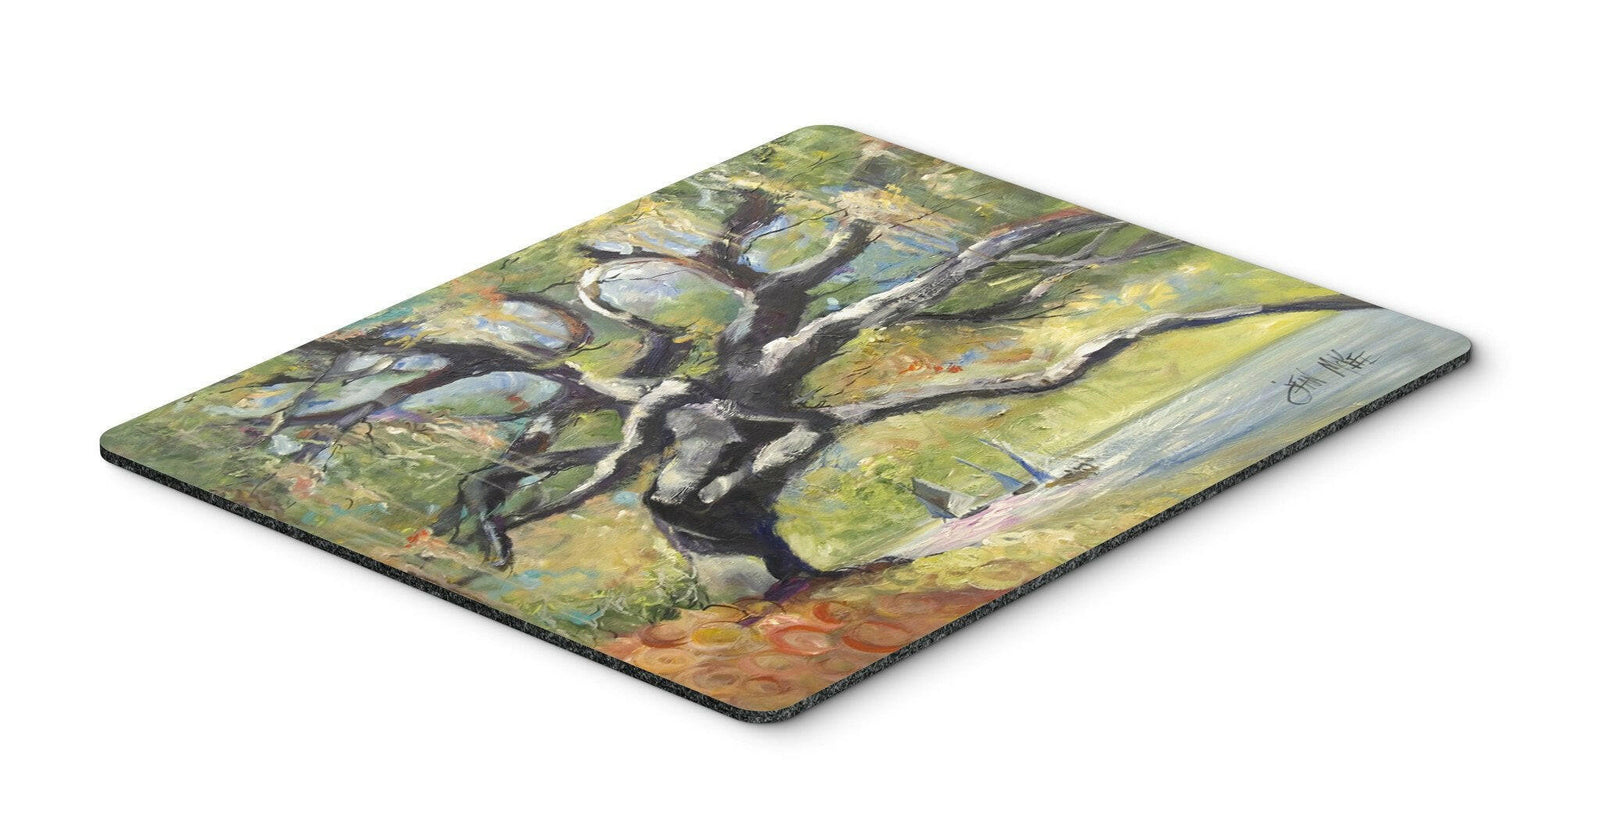 Oak Tree on the Bay with Sailboats Mouse Pad, Hot Pad or Trivet JMK1132MP by Caroline's Treasures